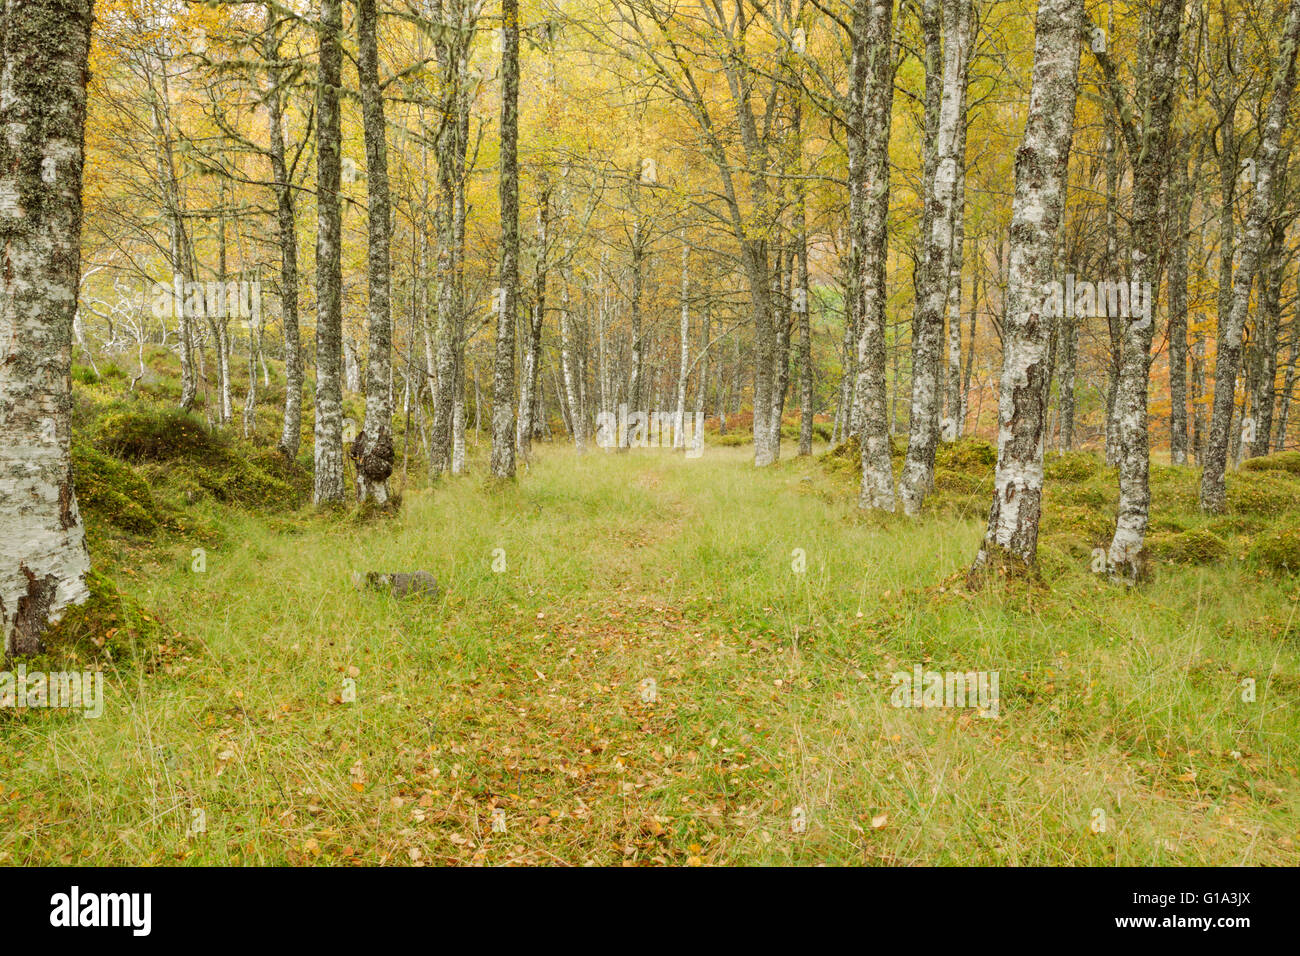 leaf covered path through birch woodland showing autumn colours against white bark Stock Photo